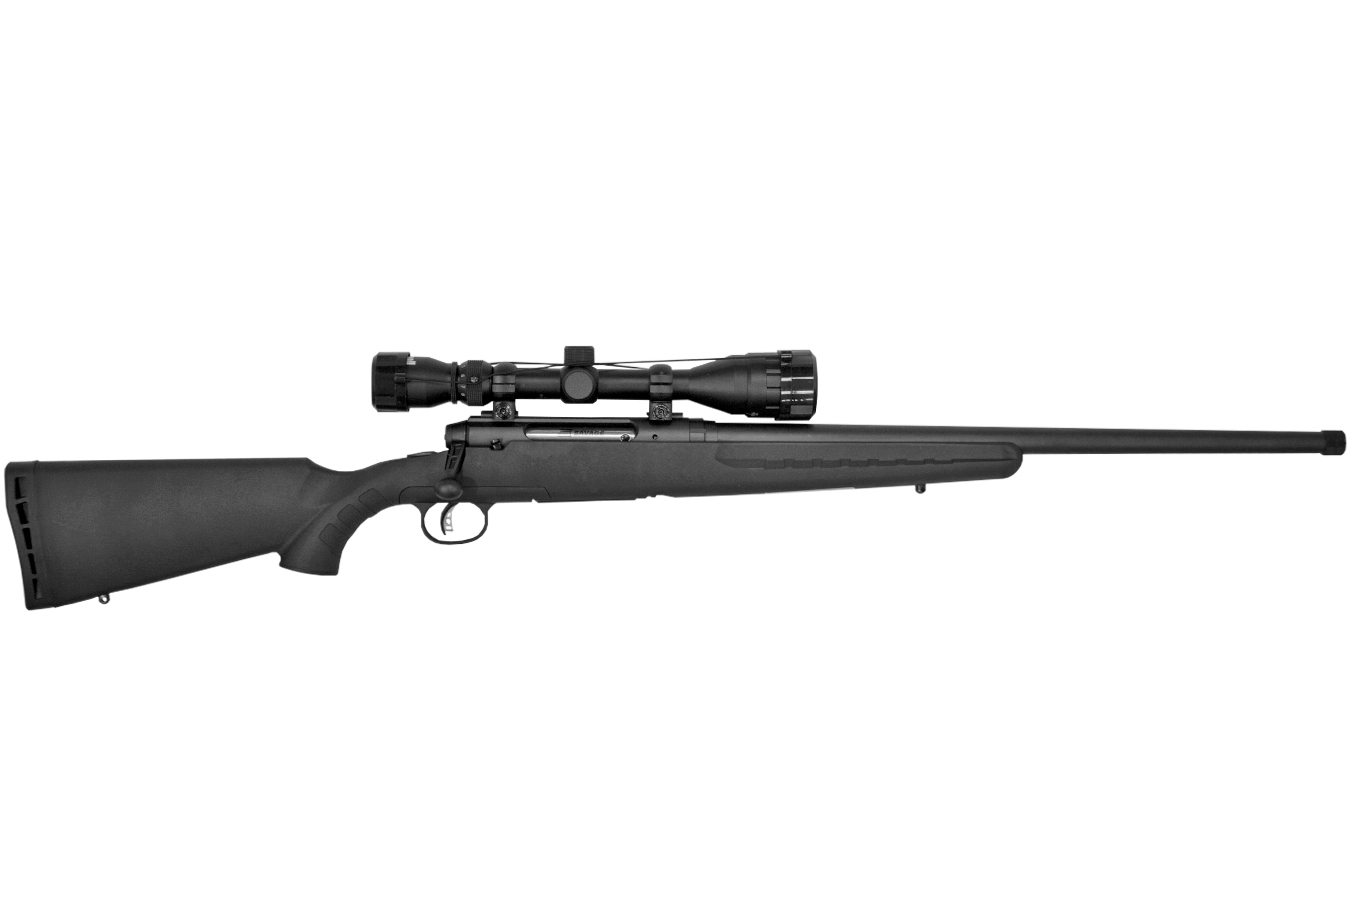 No. 13 Best Selling: SAVAGE AXIS II XP 243 WIN 4-12X40 HB BLK STOCK